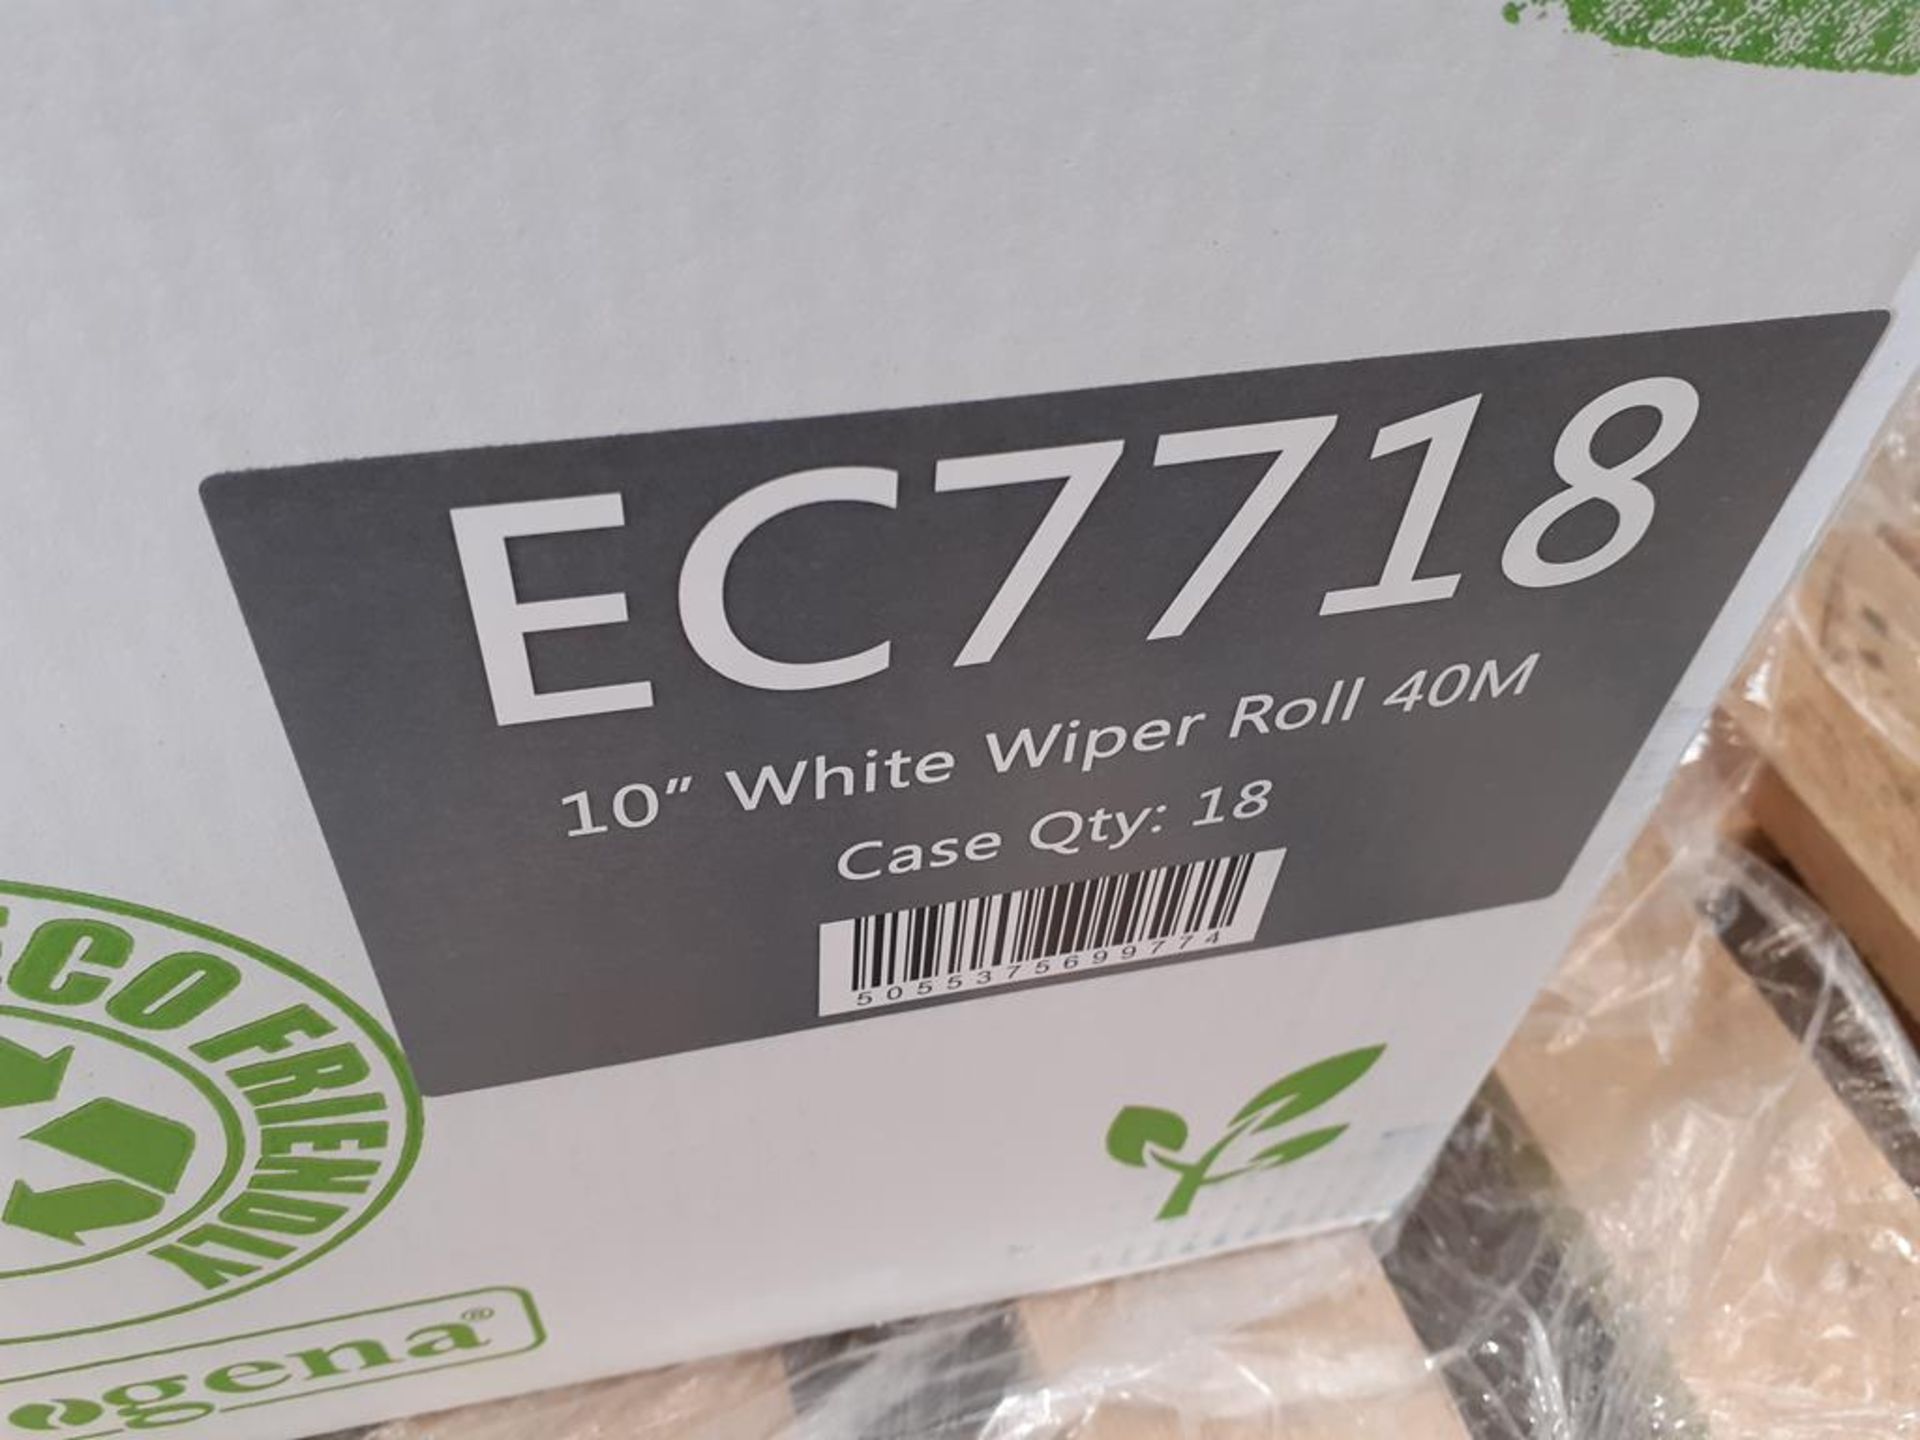 Pallet of 10" White Wiper Rolls 40m (approx 11 boxes) - Image 3 of 3